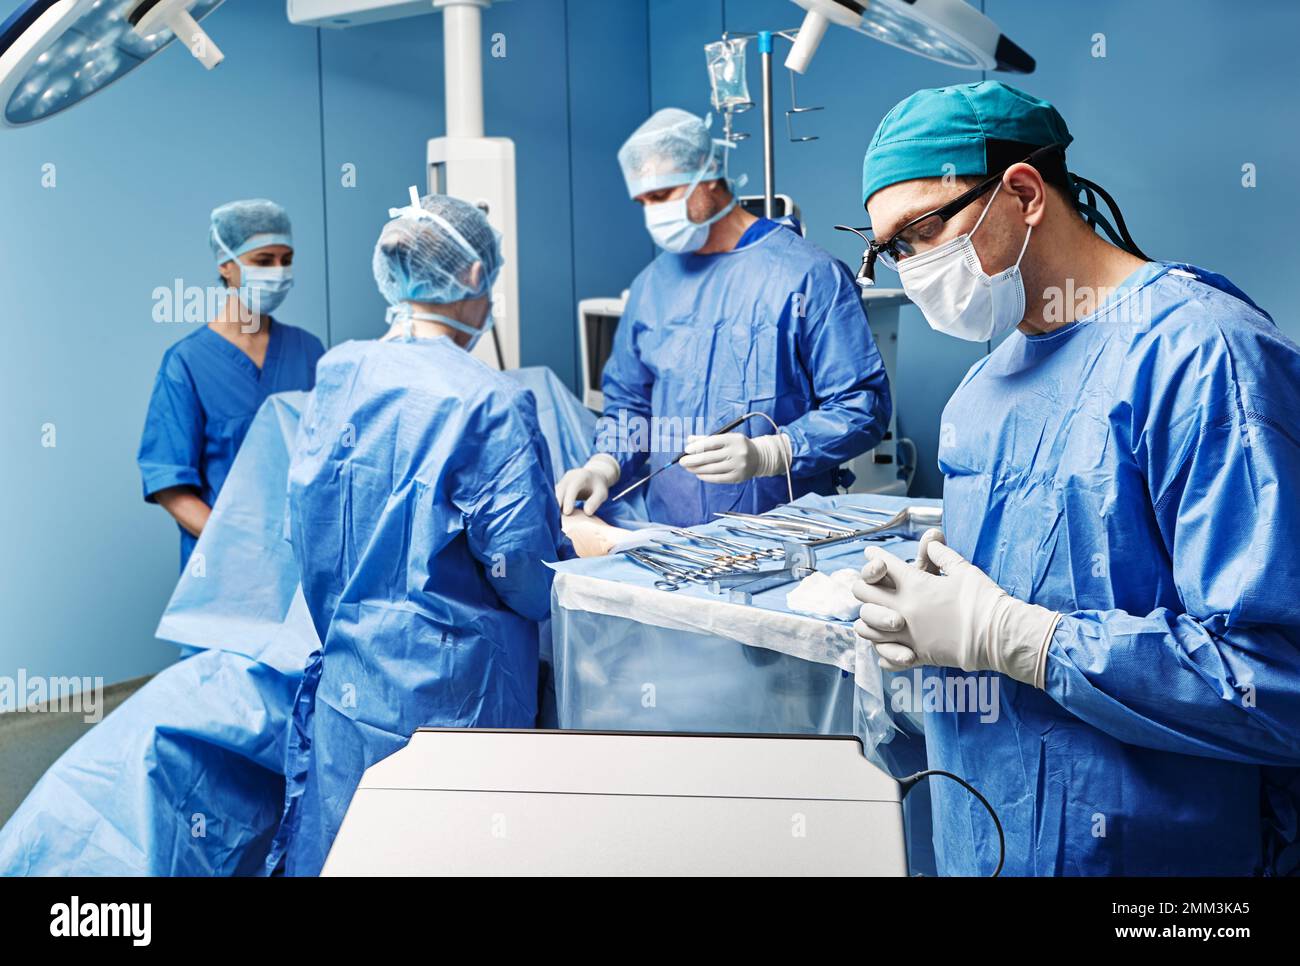 Surgical medical team performing surgical operation in modern operating room Stock Photo